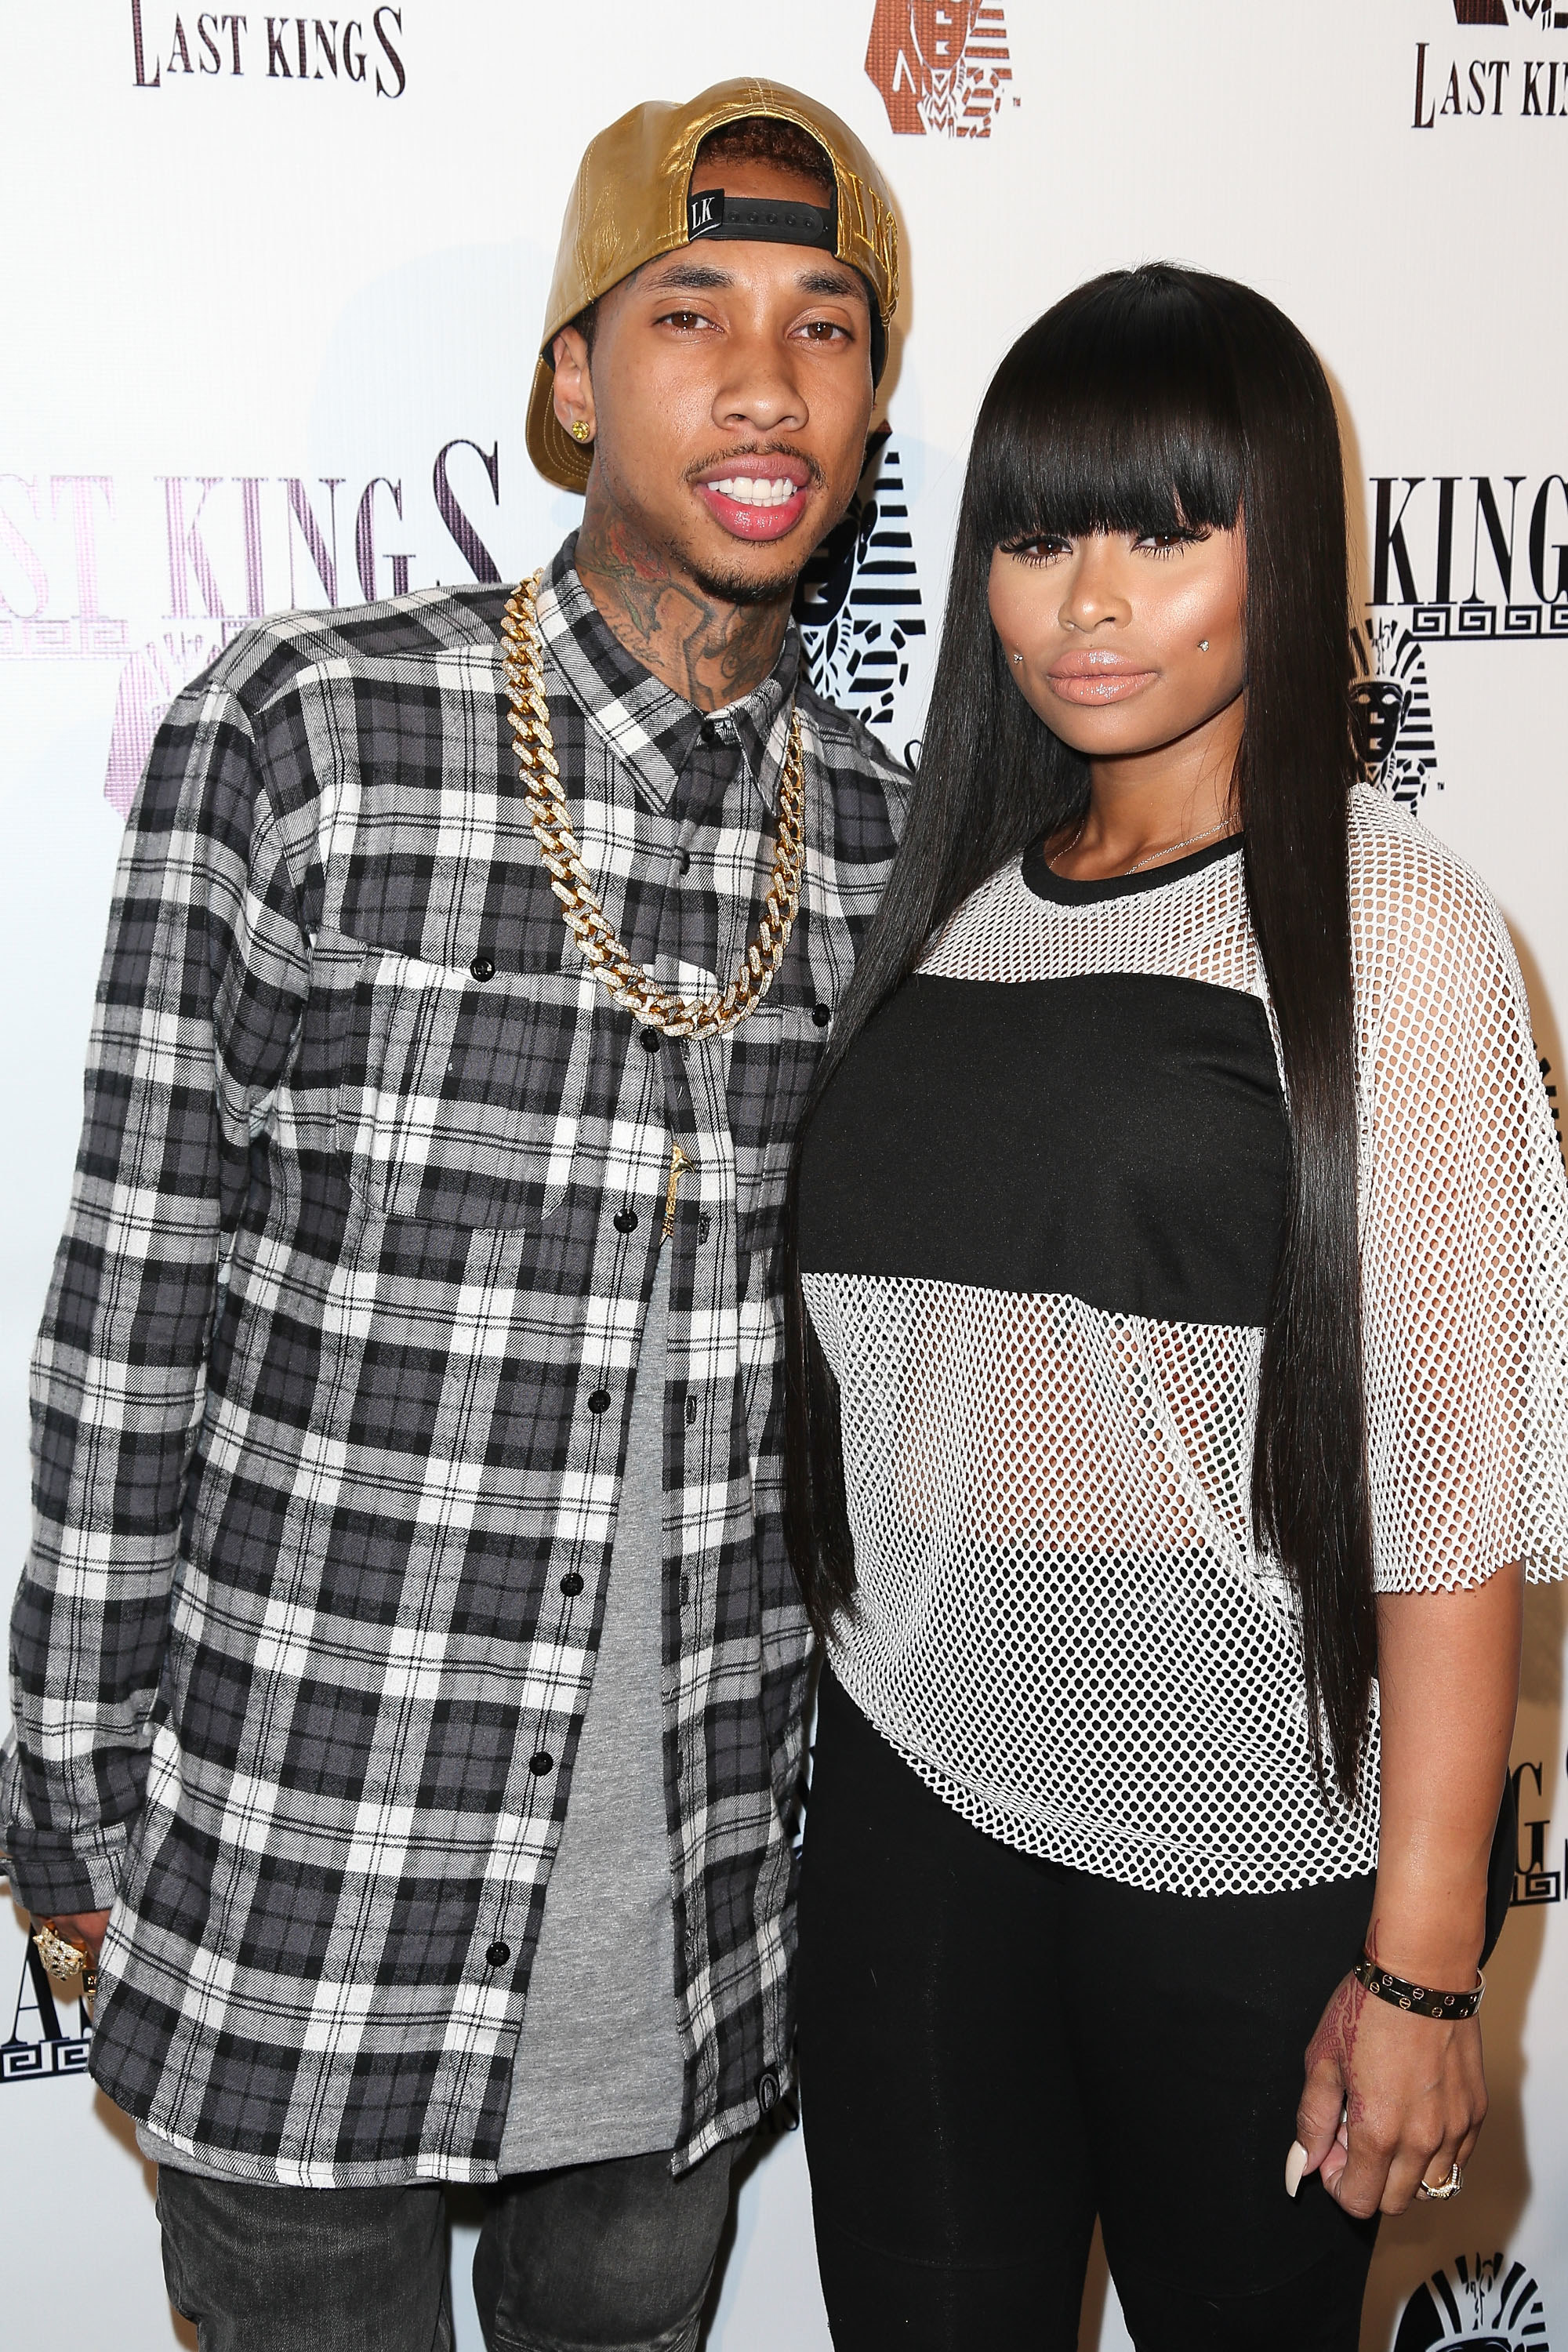 Tyga and Blac Chyna pose for a photo at a red carpet event